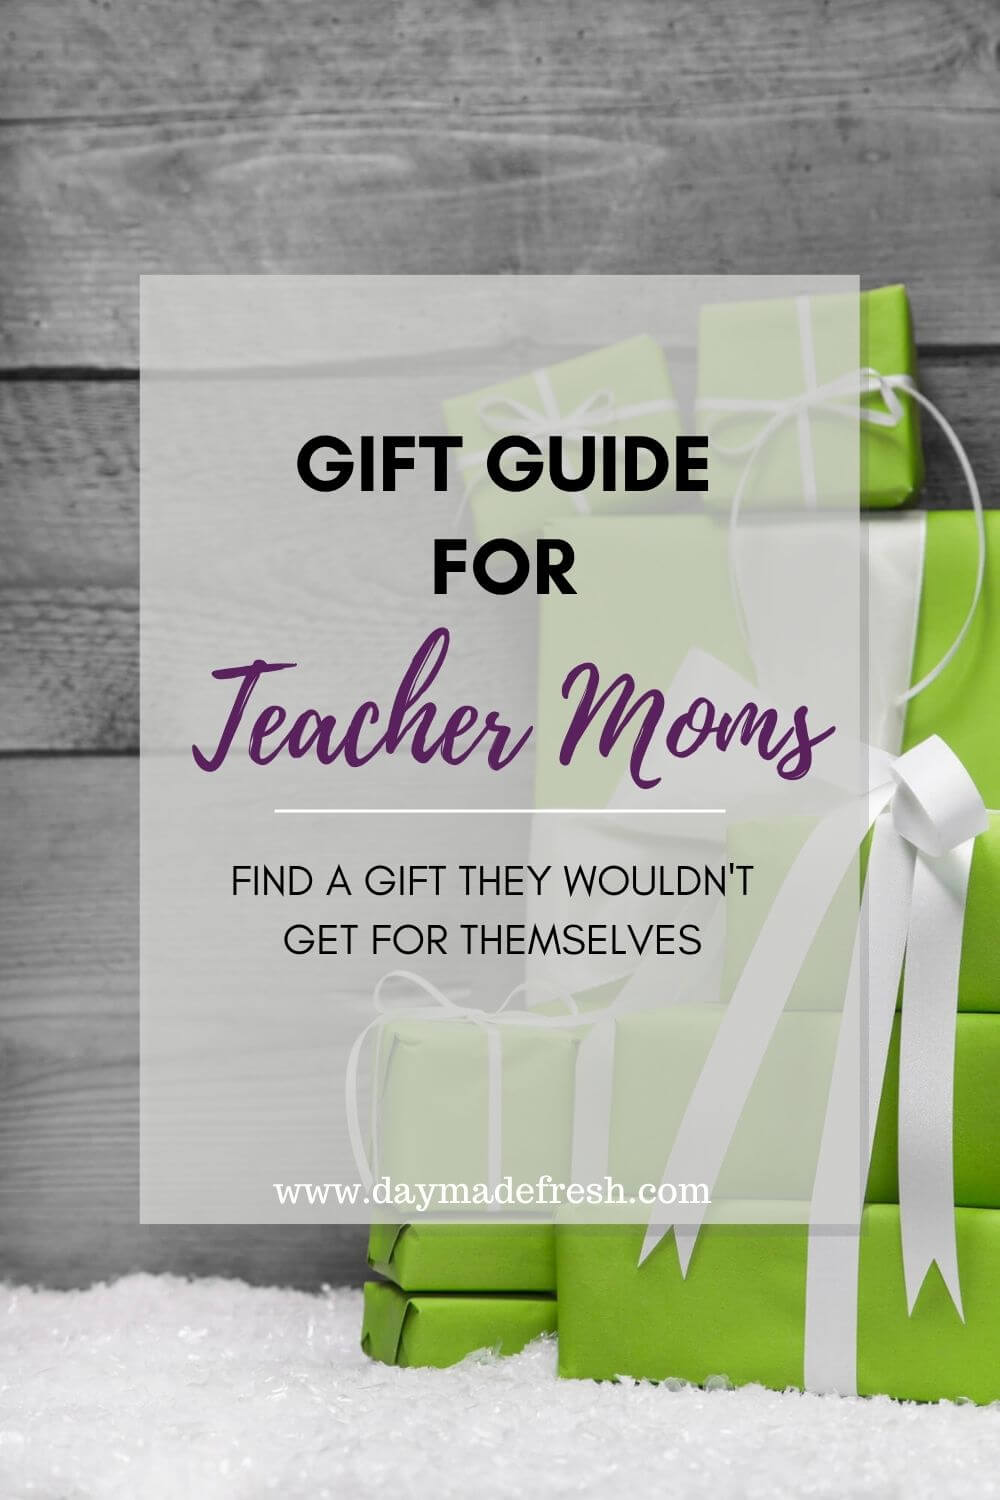 Image Text: Gift Guide For Teacher Moms; Find a Gift They Wouldn't Get Themselves Image: Stack of green gifts against wood wall